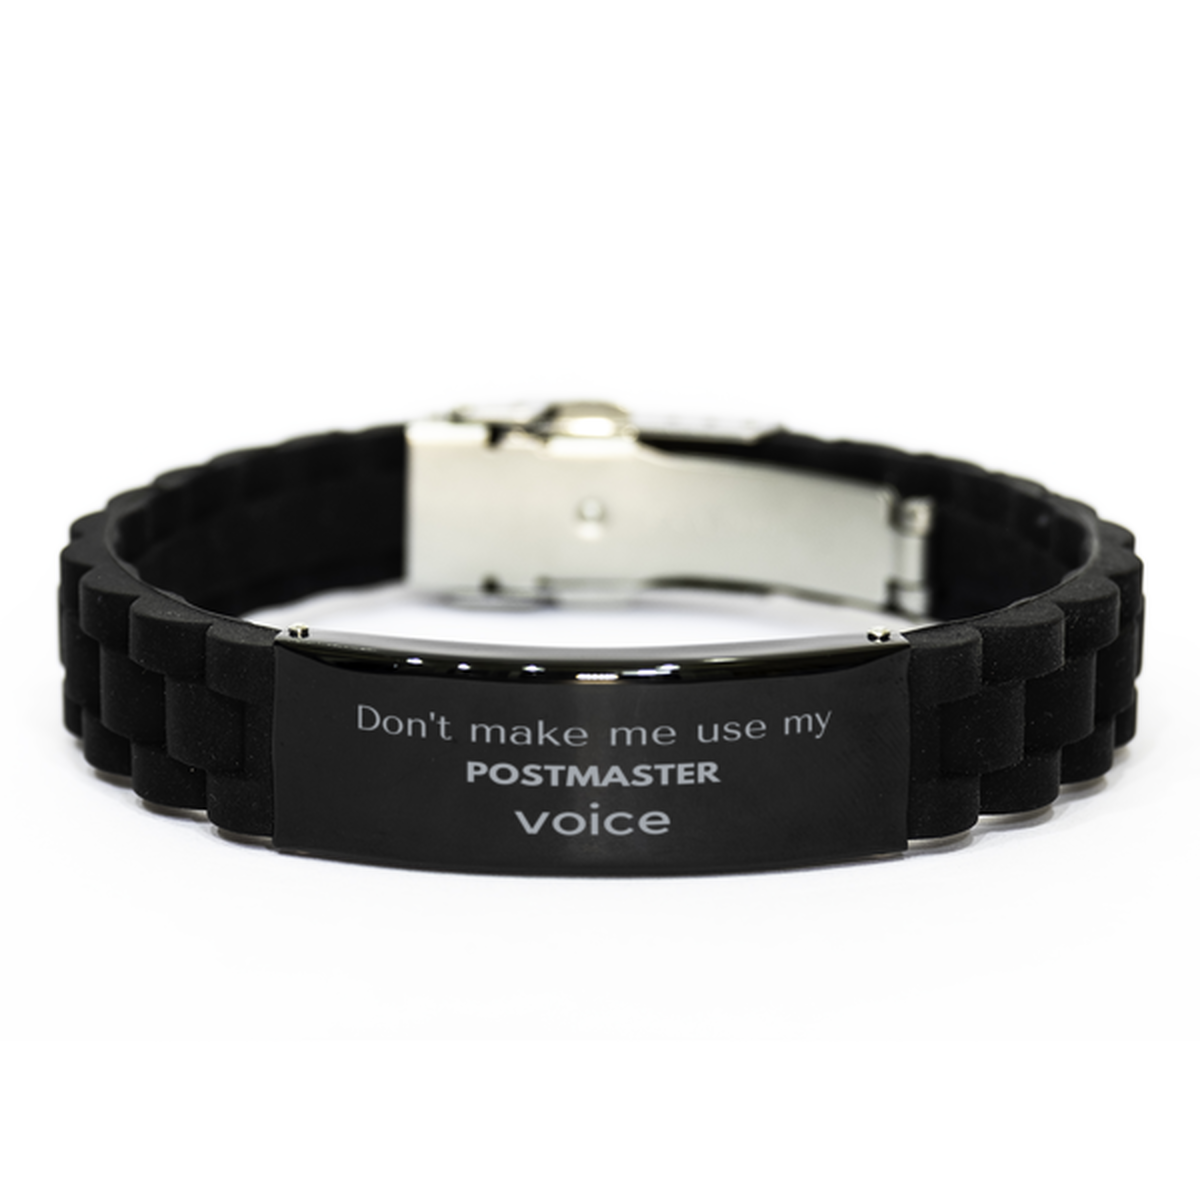 Don't make me use my Postmaster voice, Sarcasm Postmaster Gifts, Christmas Postmaster Black Glidelock Clasp Bracelet Birthday Unique Gifts For Postmaster Coworkers, Men, Women, Colleague, Friends